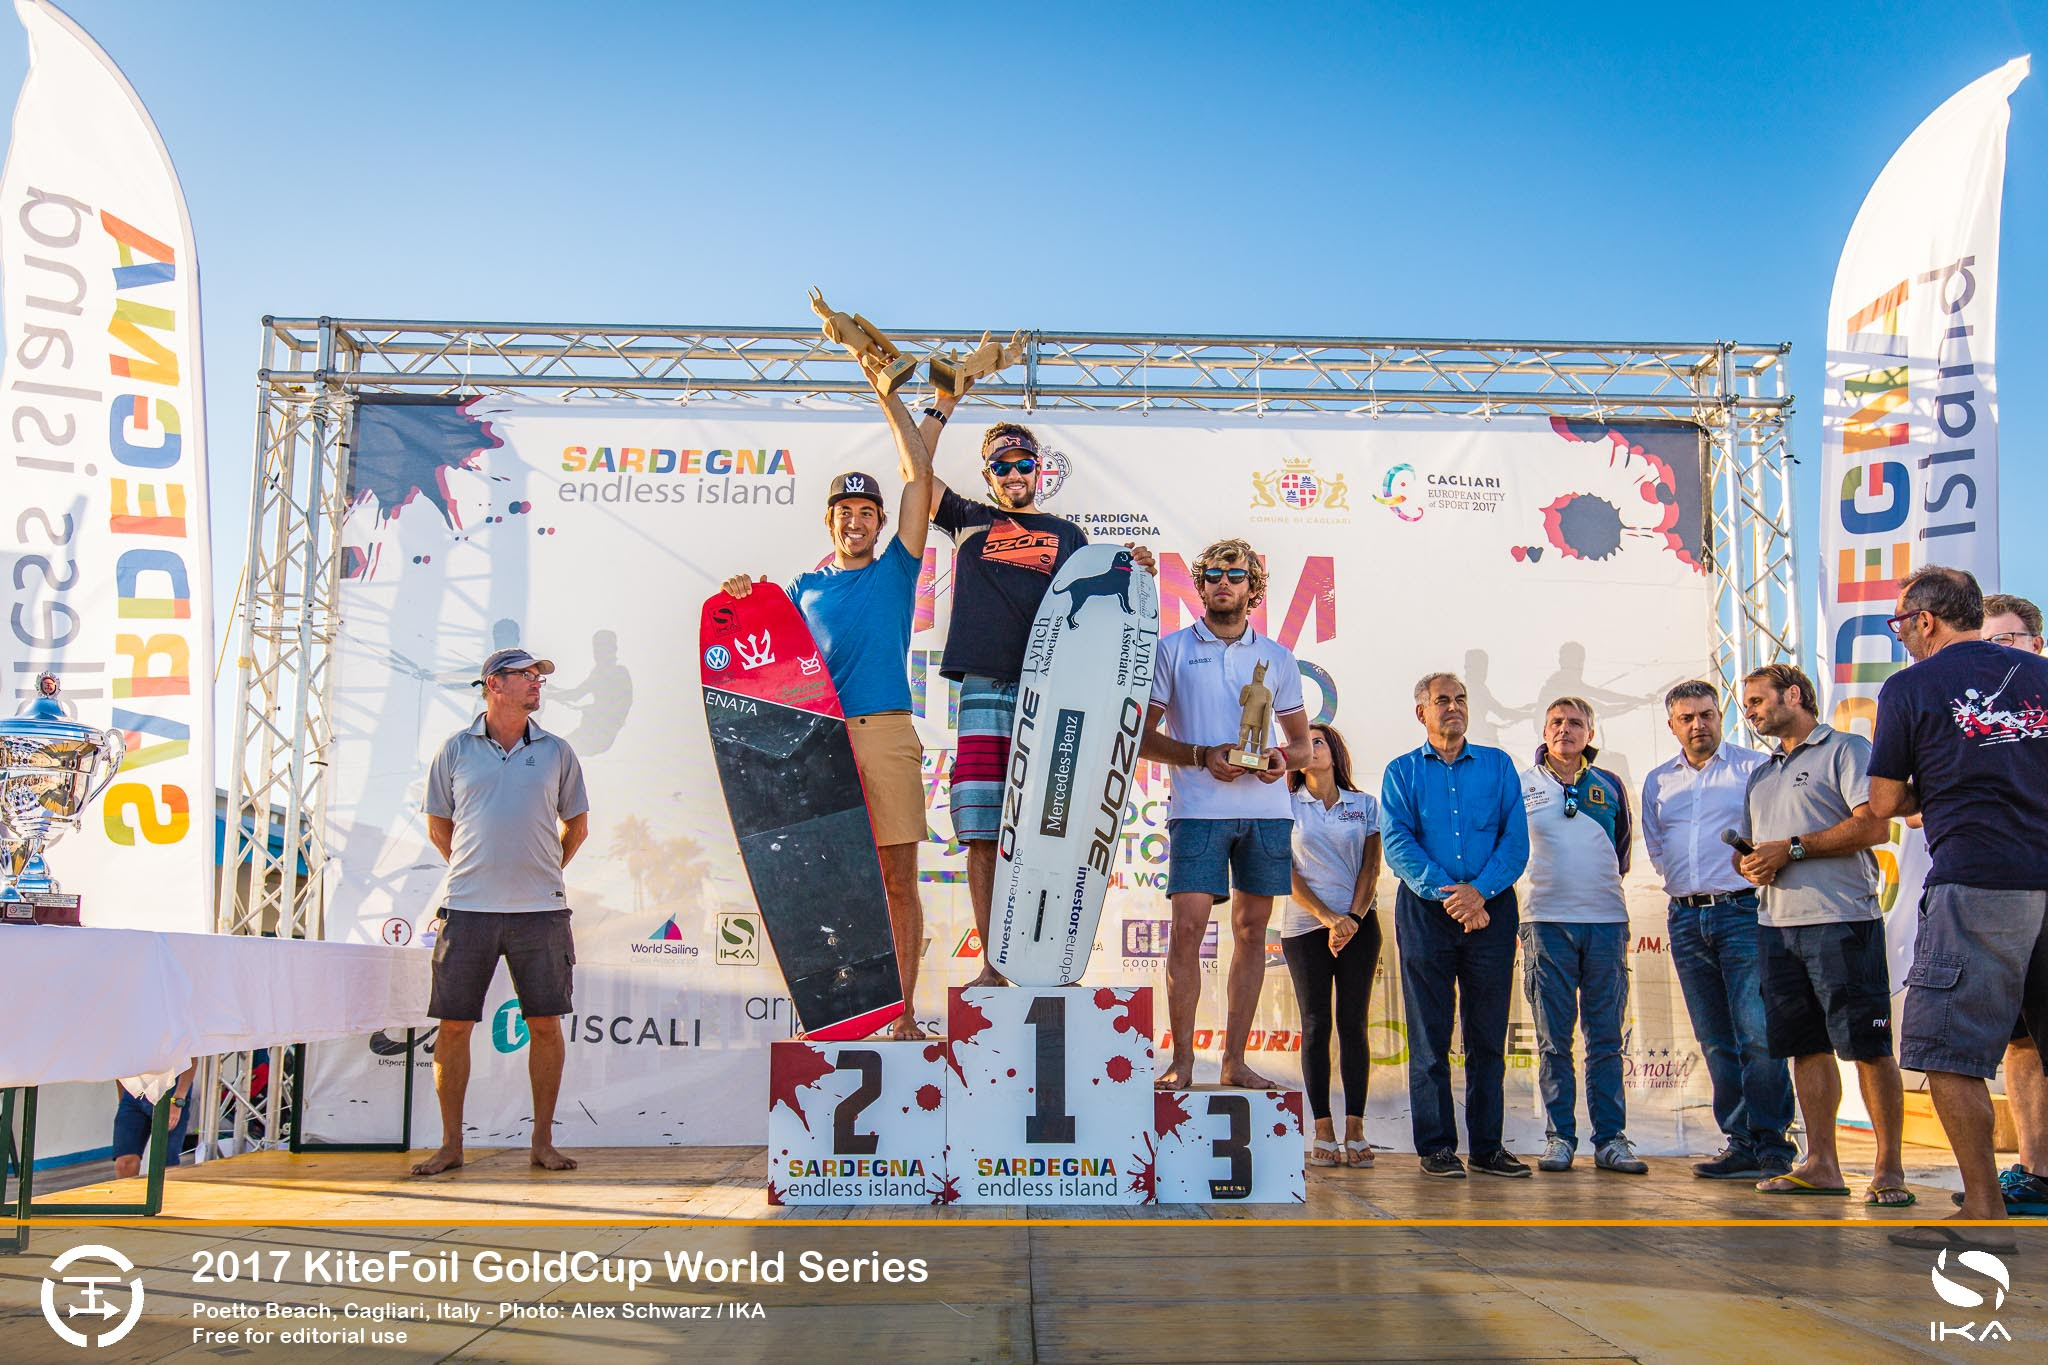 39931ffa 3823 4f5e b967 3c98c7478862 - Final day of racing at KiteFoil World Championships